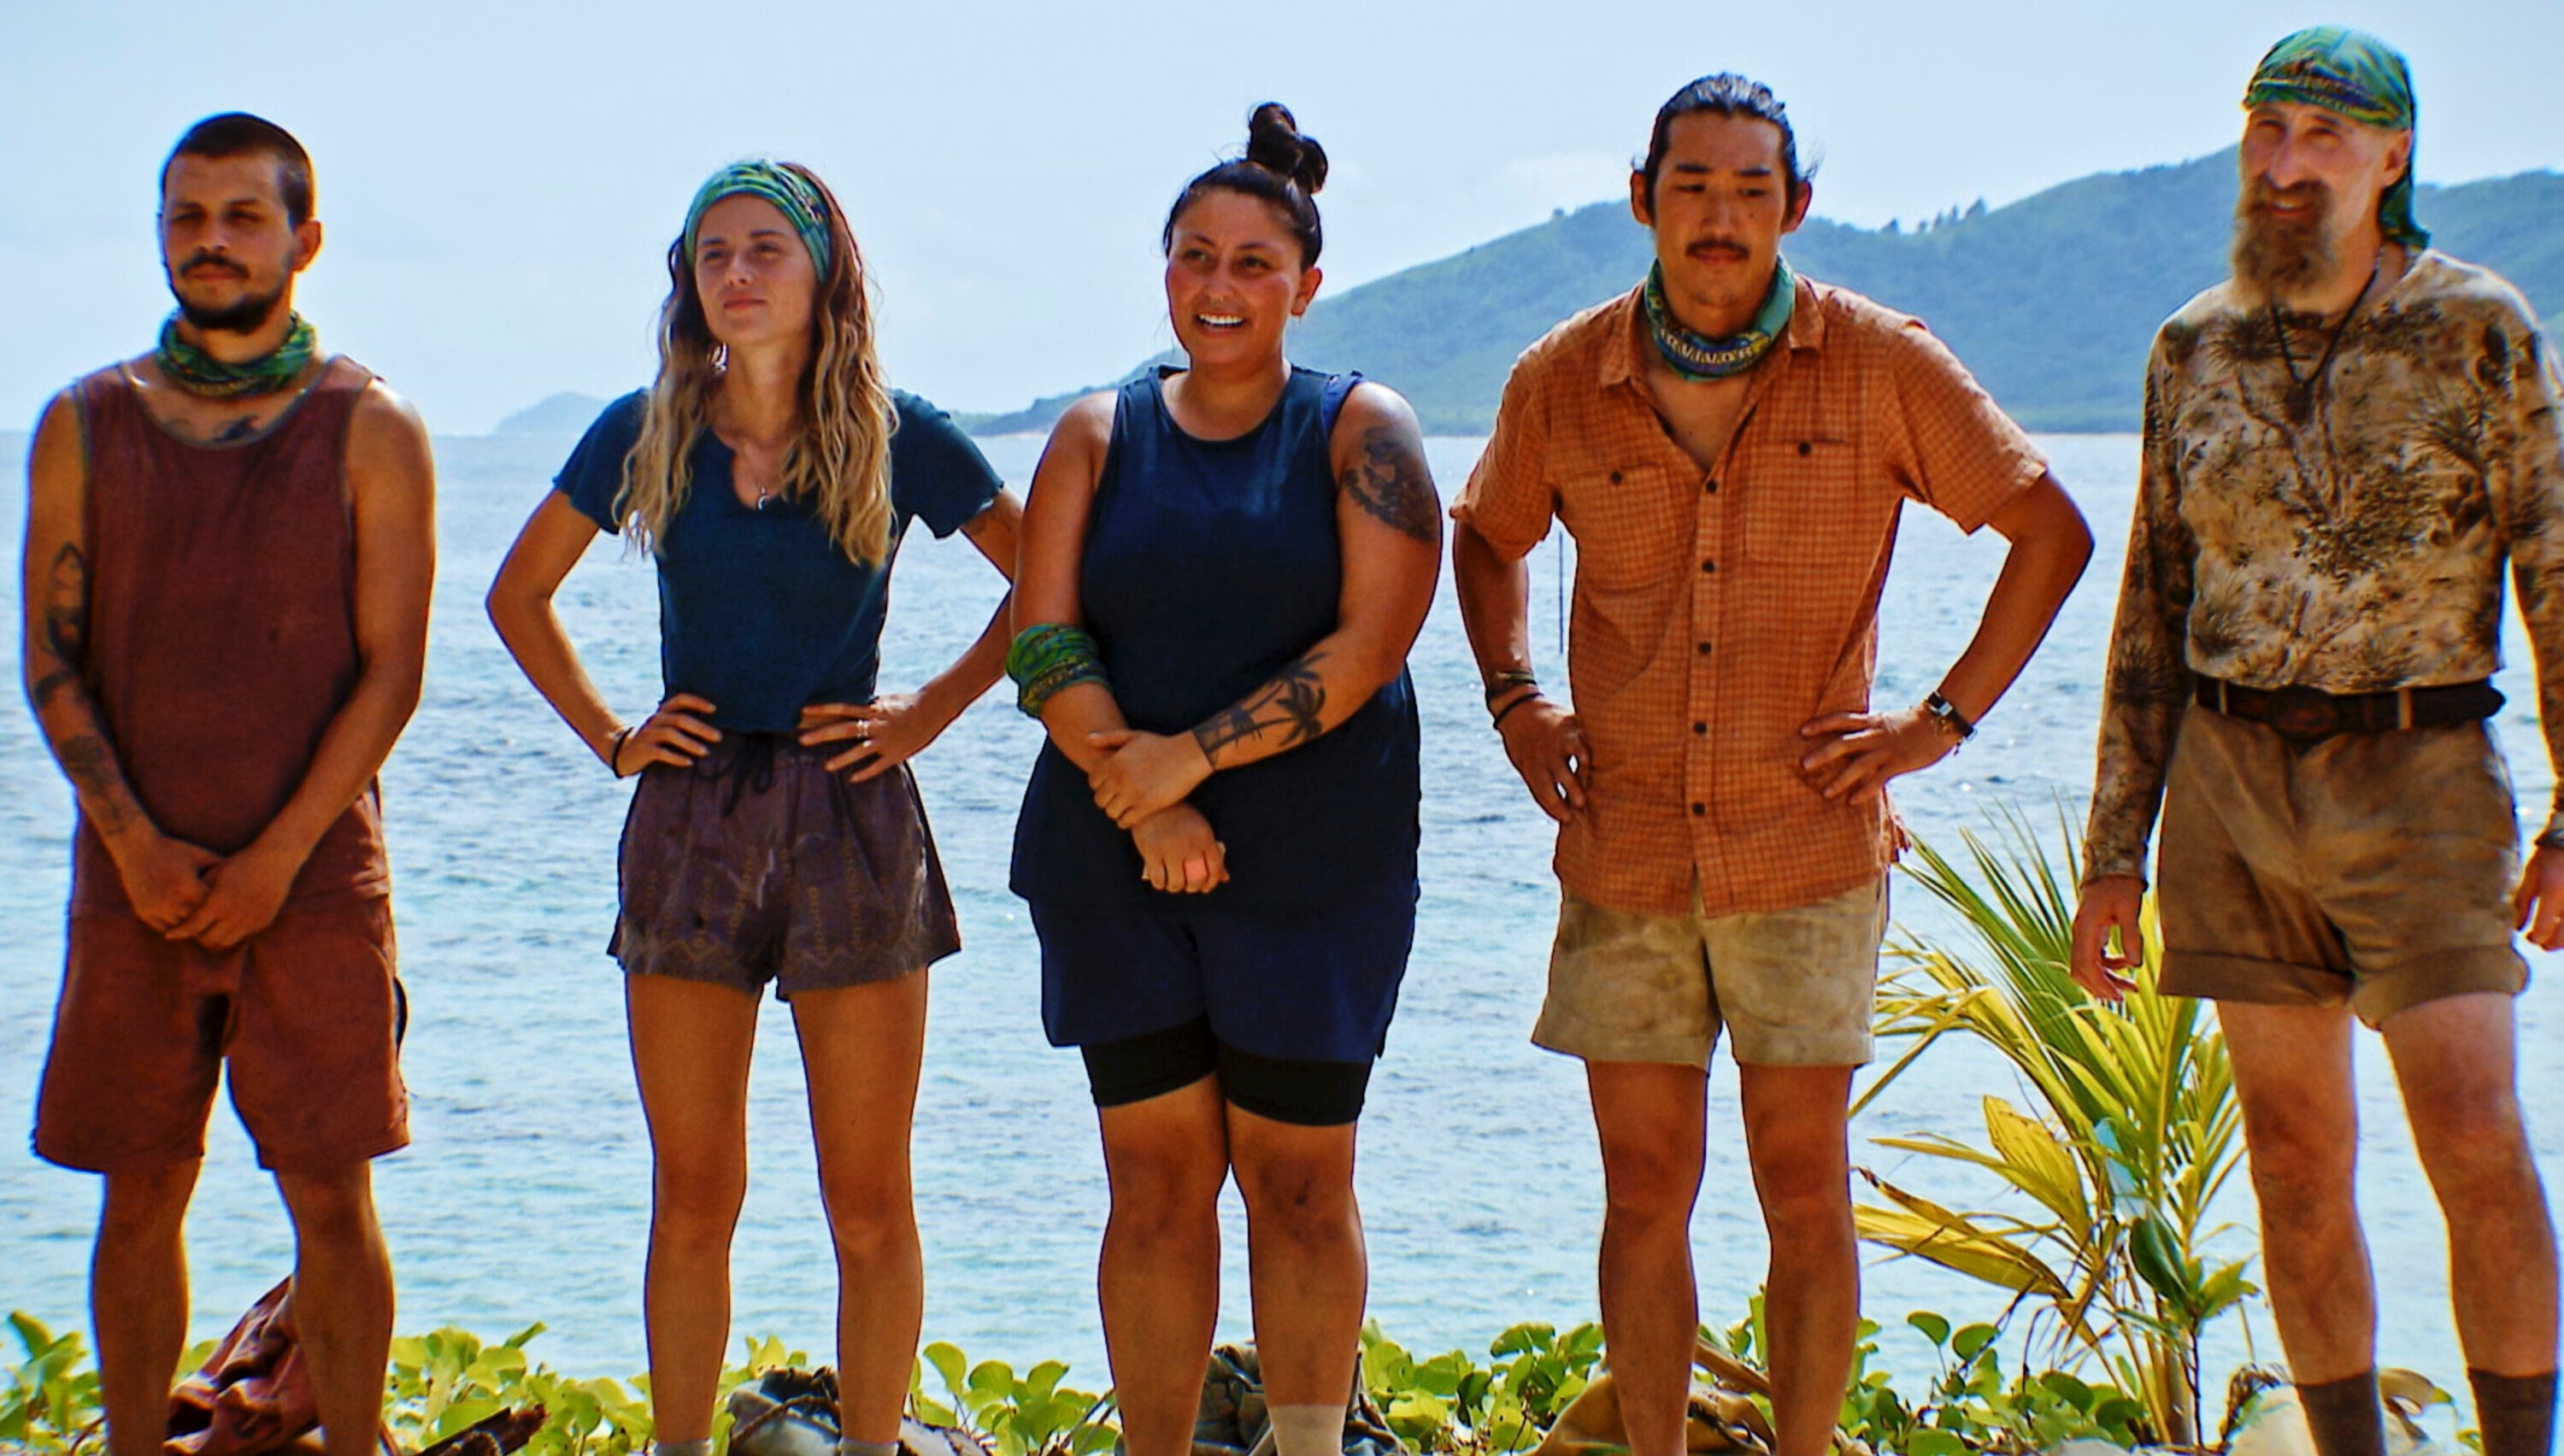 Jesse Lopez, Cassidy Clark, Karla Cruz Godoy, Owen Knight, and Mike Gabler star in the 'Survivor 43' finale, and one of them, according to spoilers, will win the game.